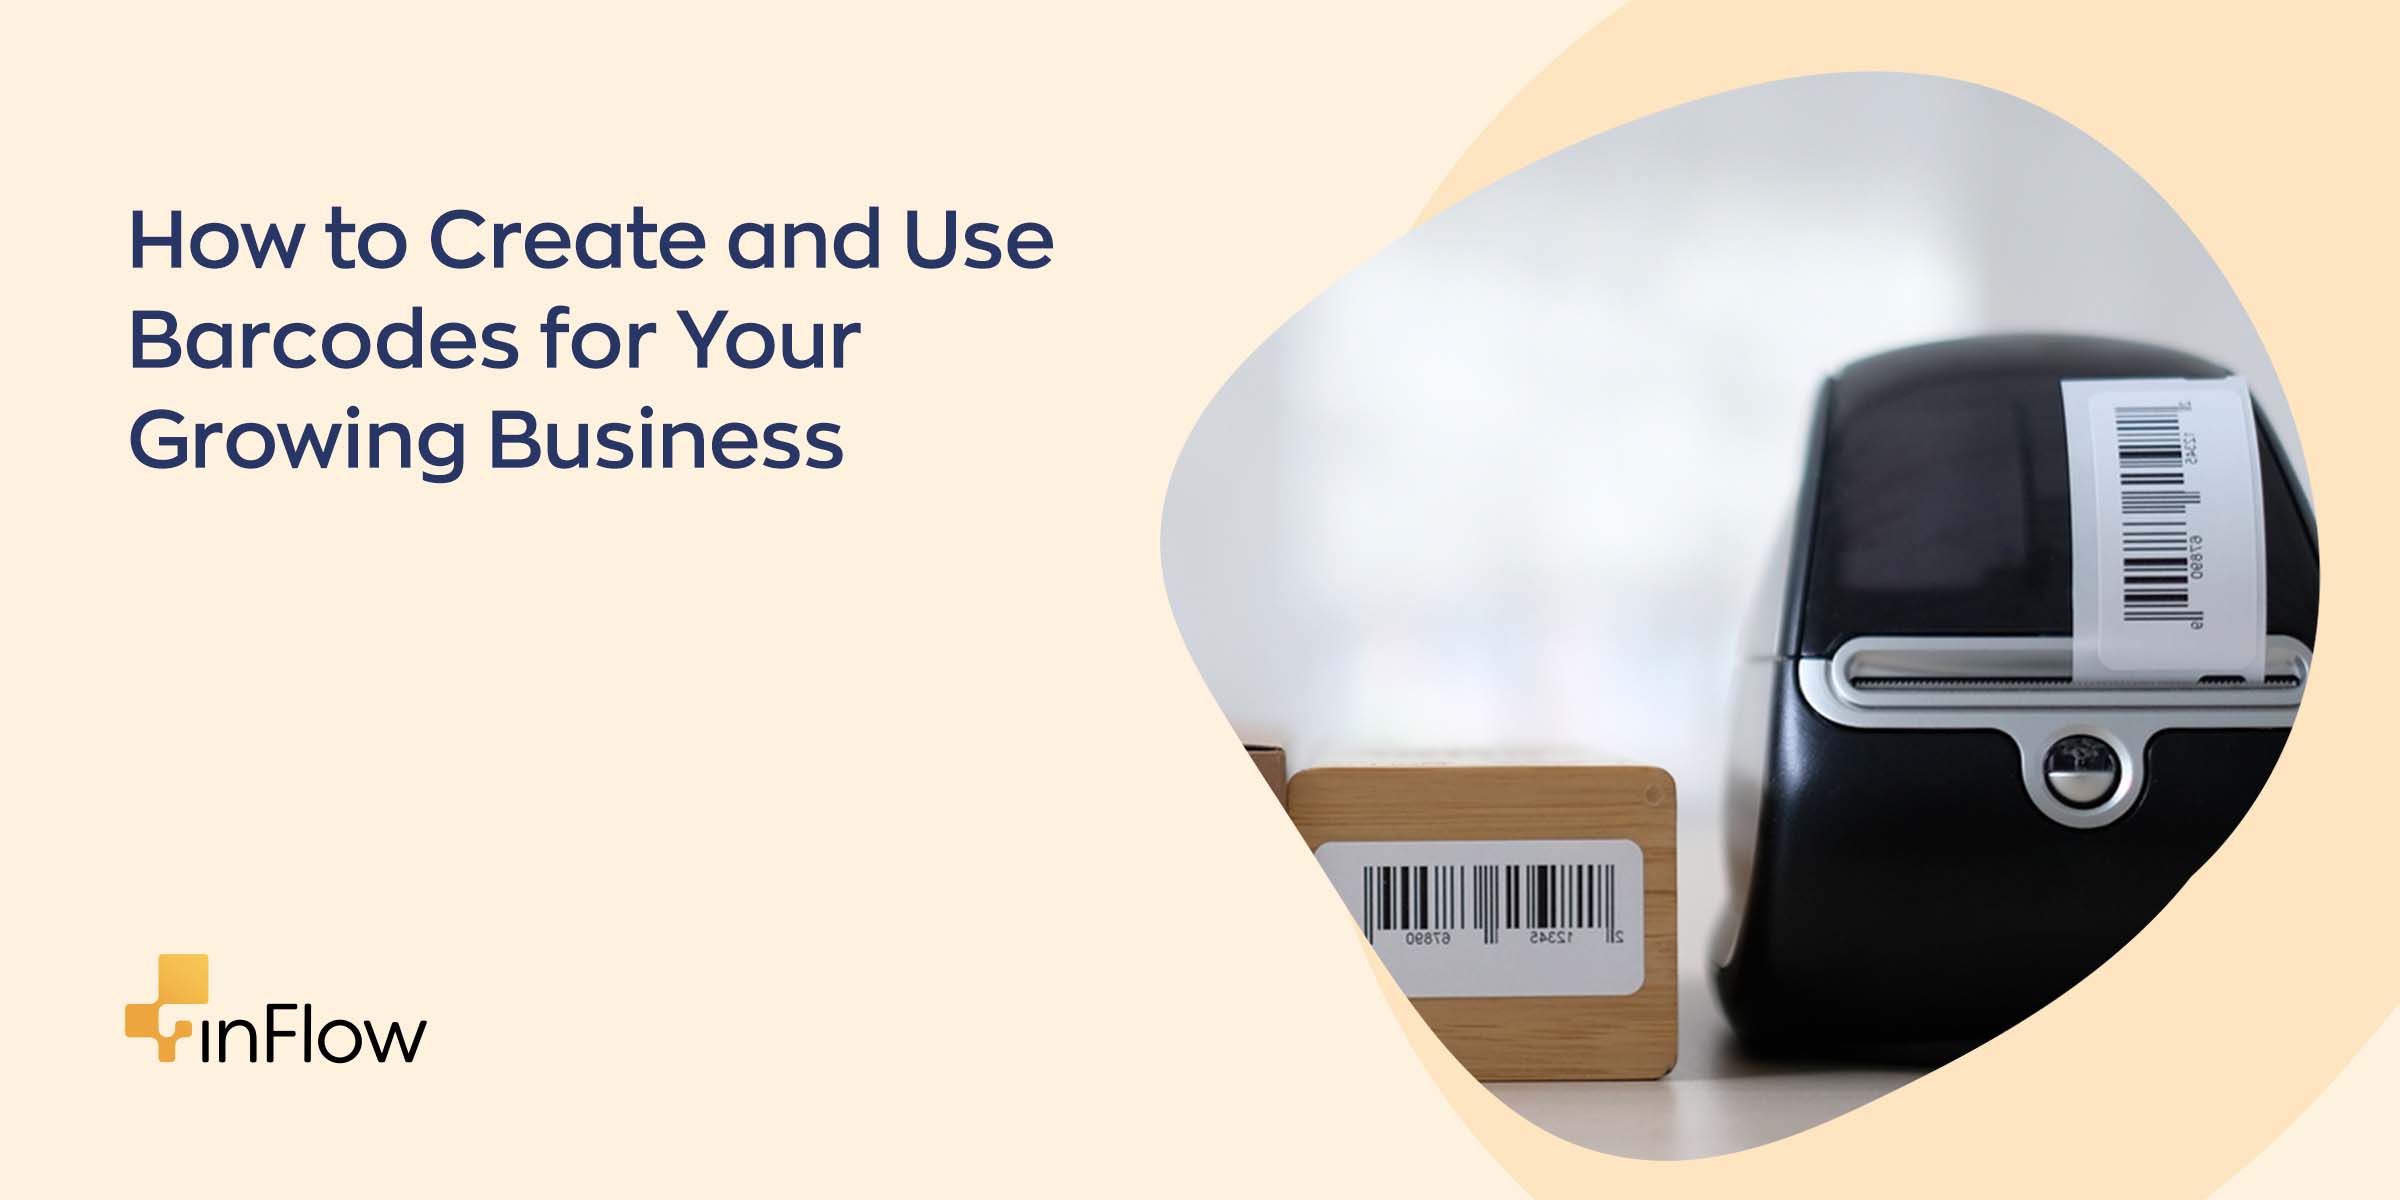 How to Create and Use Barcodes For Your Growing Business